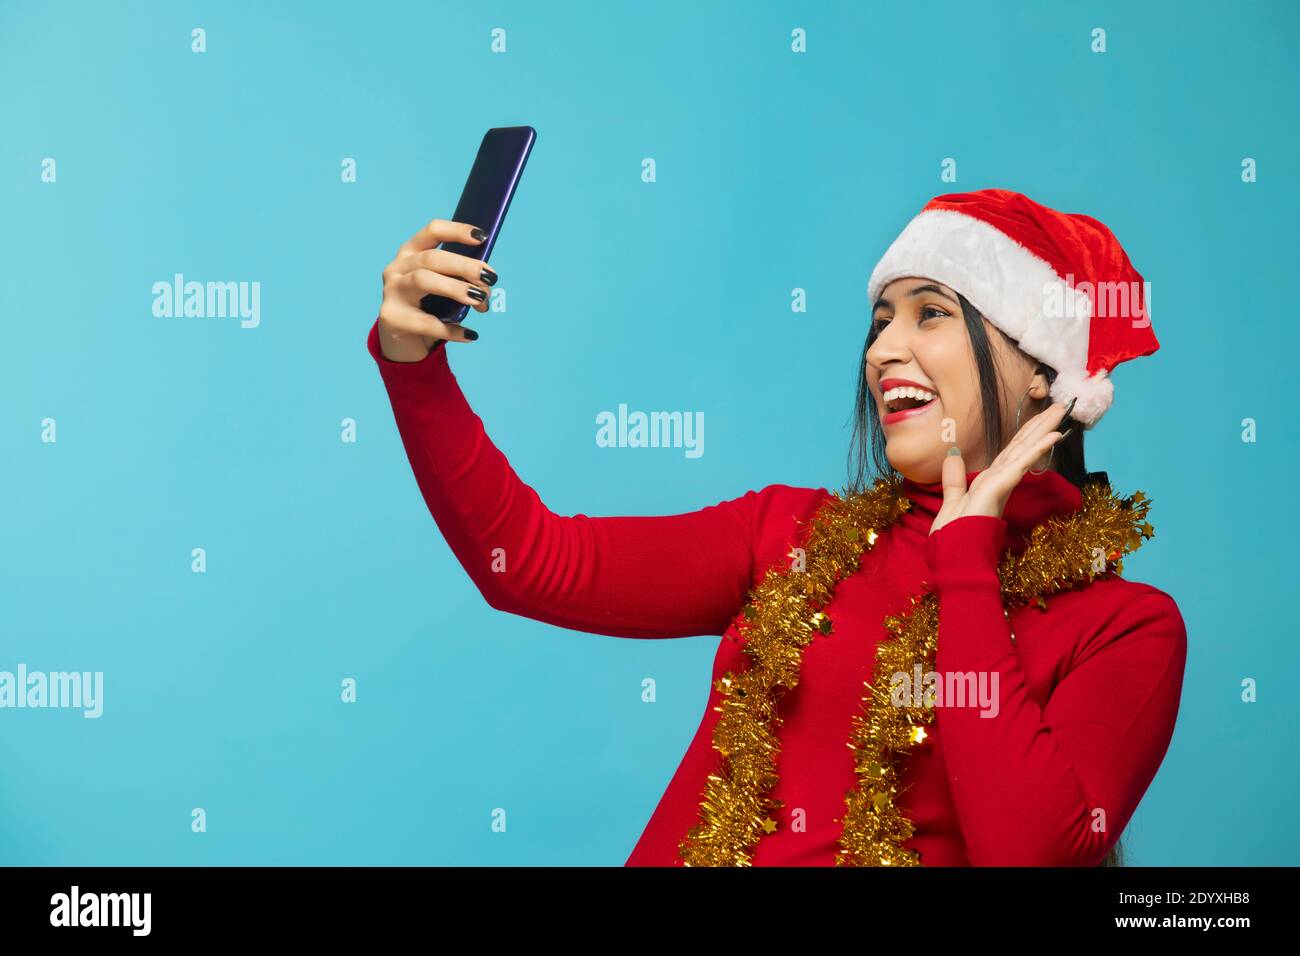 Woman taking selfie with mobile phone wearing Christmas hat Stock Photo